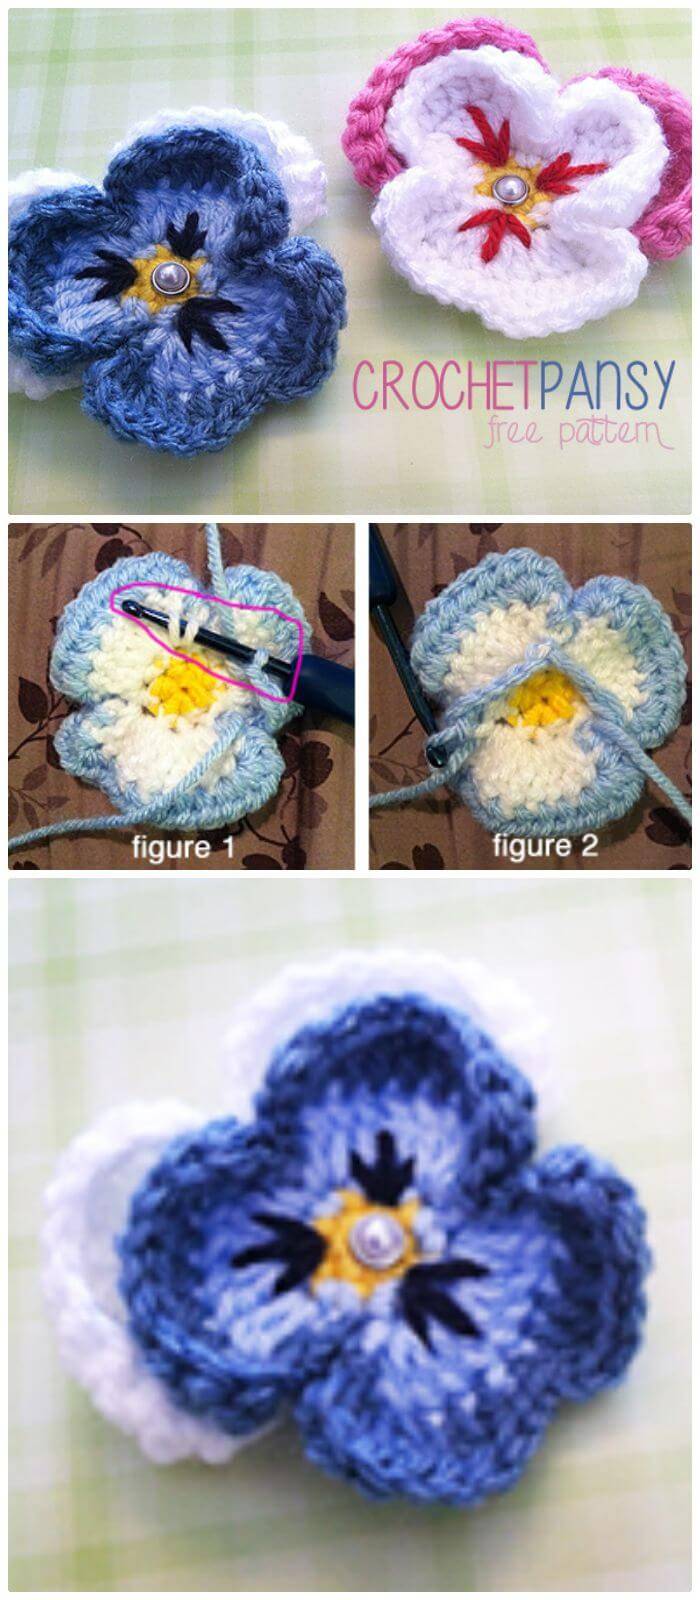 DIY Free Pattern Of Pansy Flower Crochet Pattern, Easy and quick crochet flowers patterns with free guides!